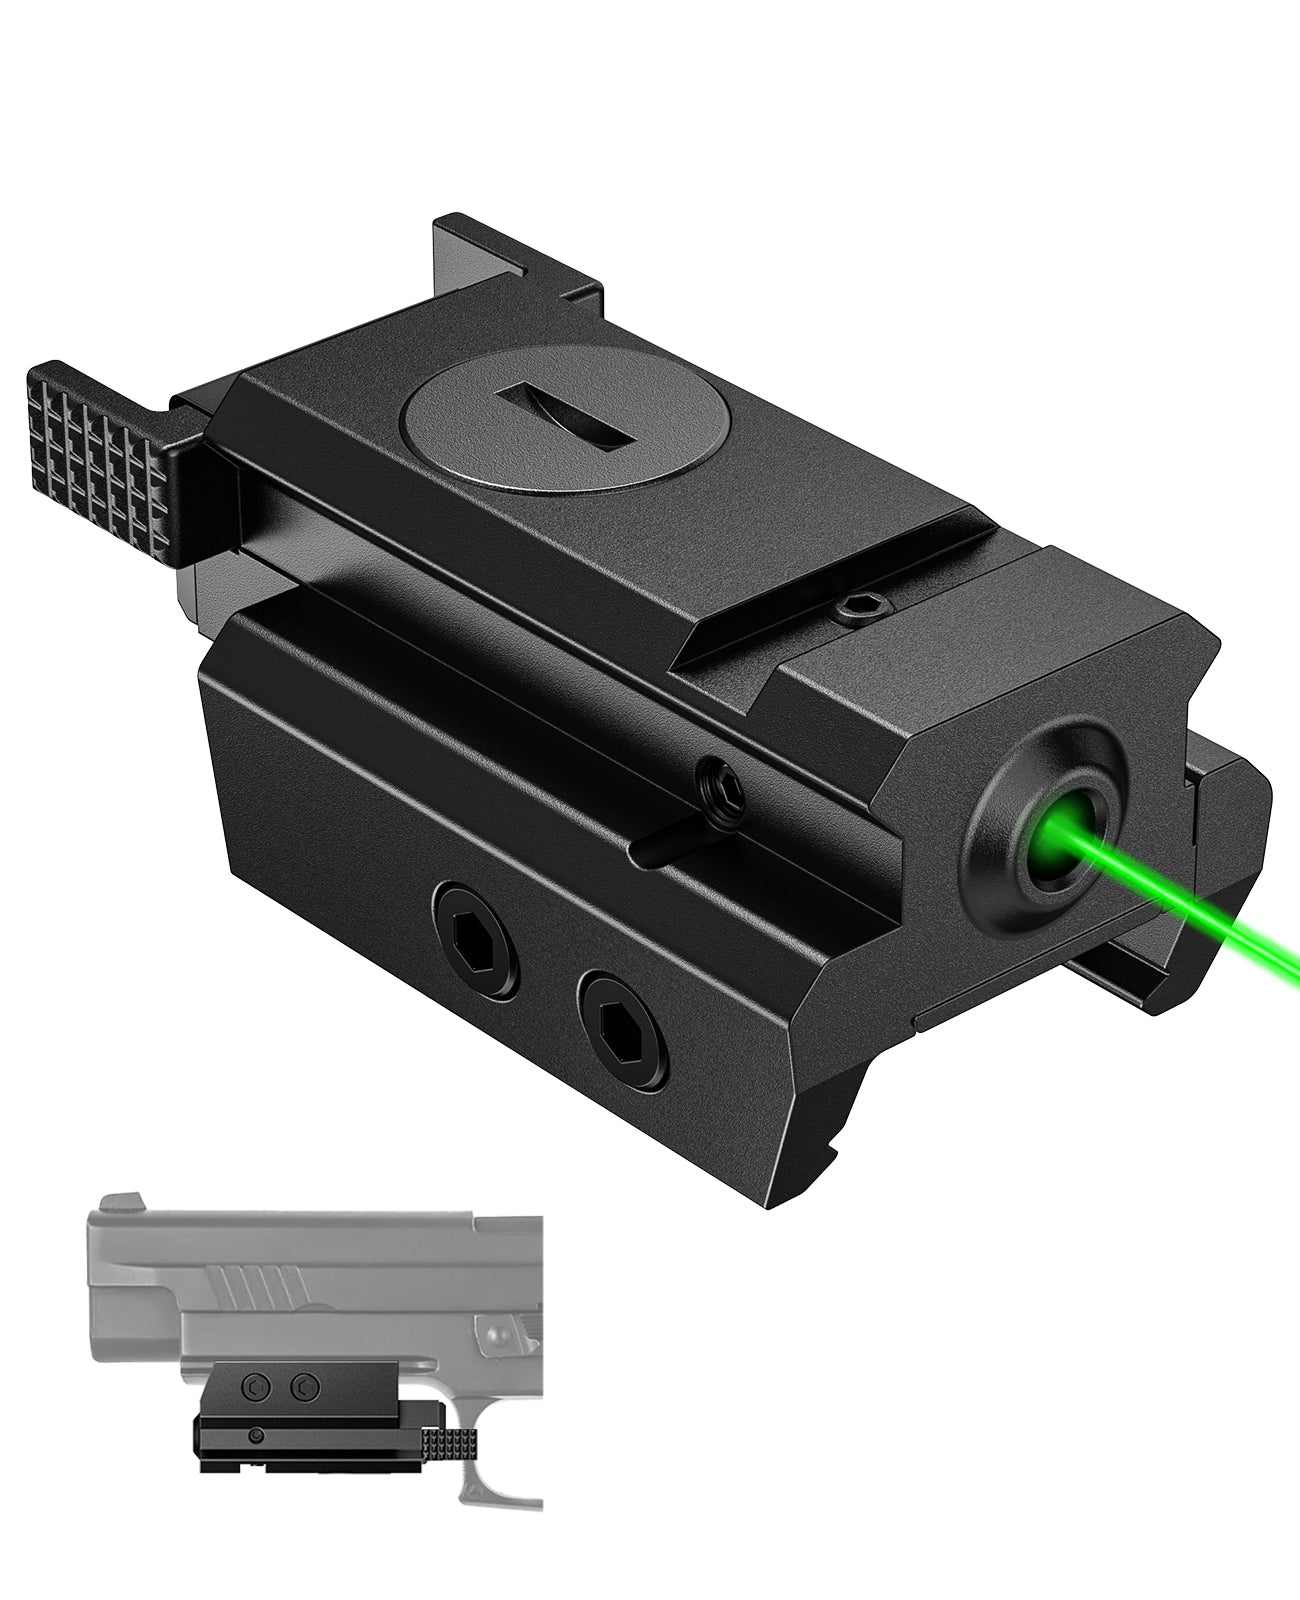  Iron JIA'S Red Laser Red Dot Sight Iron JIA'S Compact Tactical  Red Laser Sight with Rail Mount 20mm Hunting Scopes for Airsoft Pistol  Handgun Low Profile Rifle : Sports 